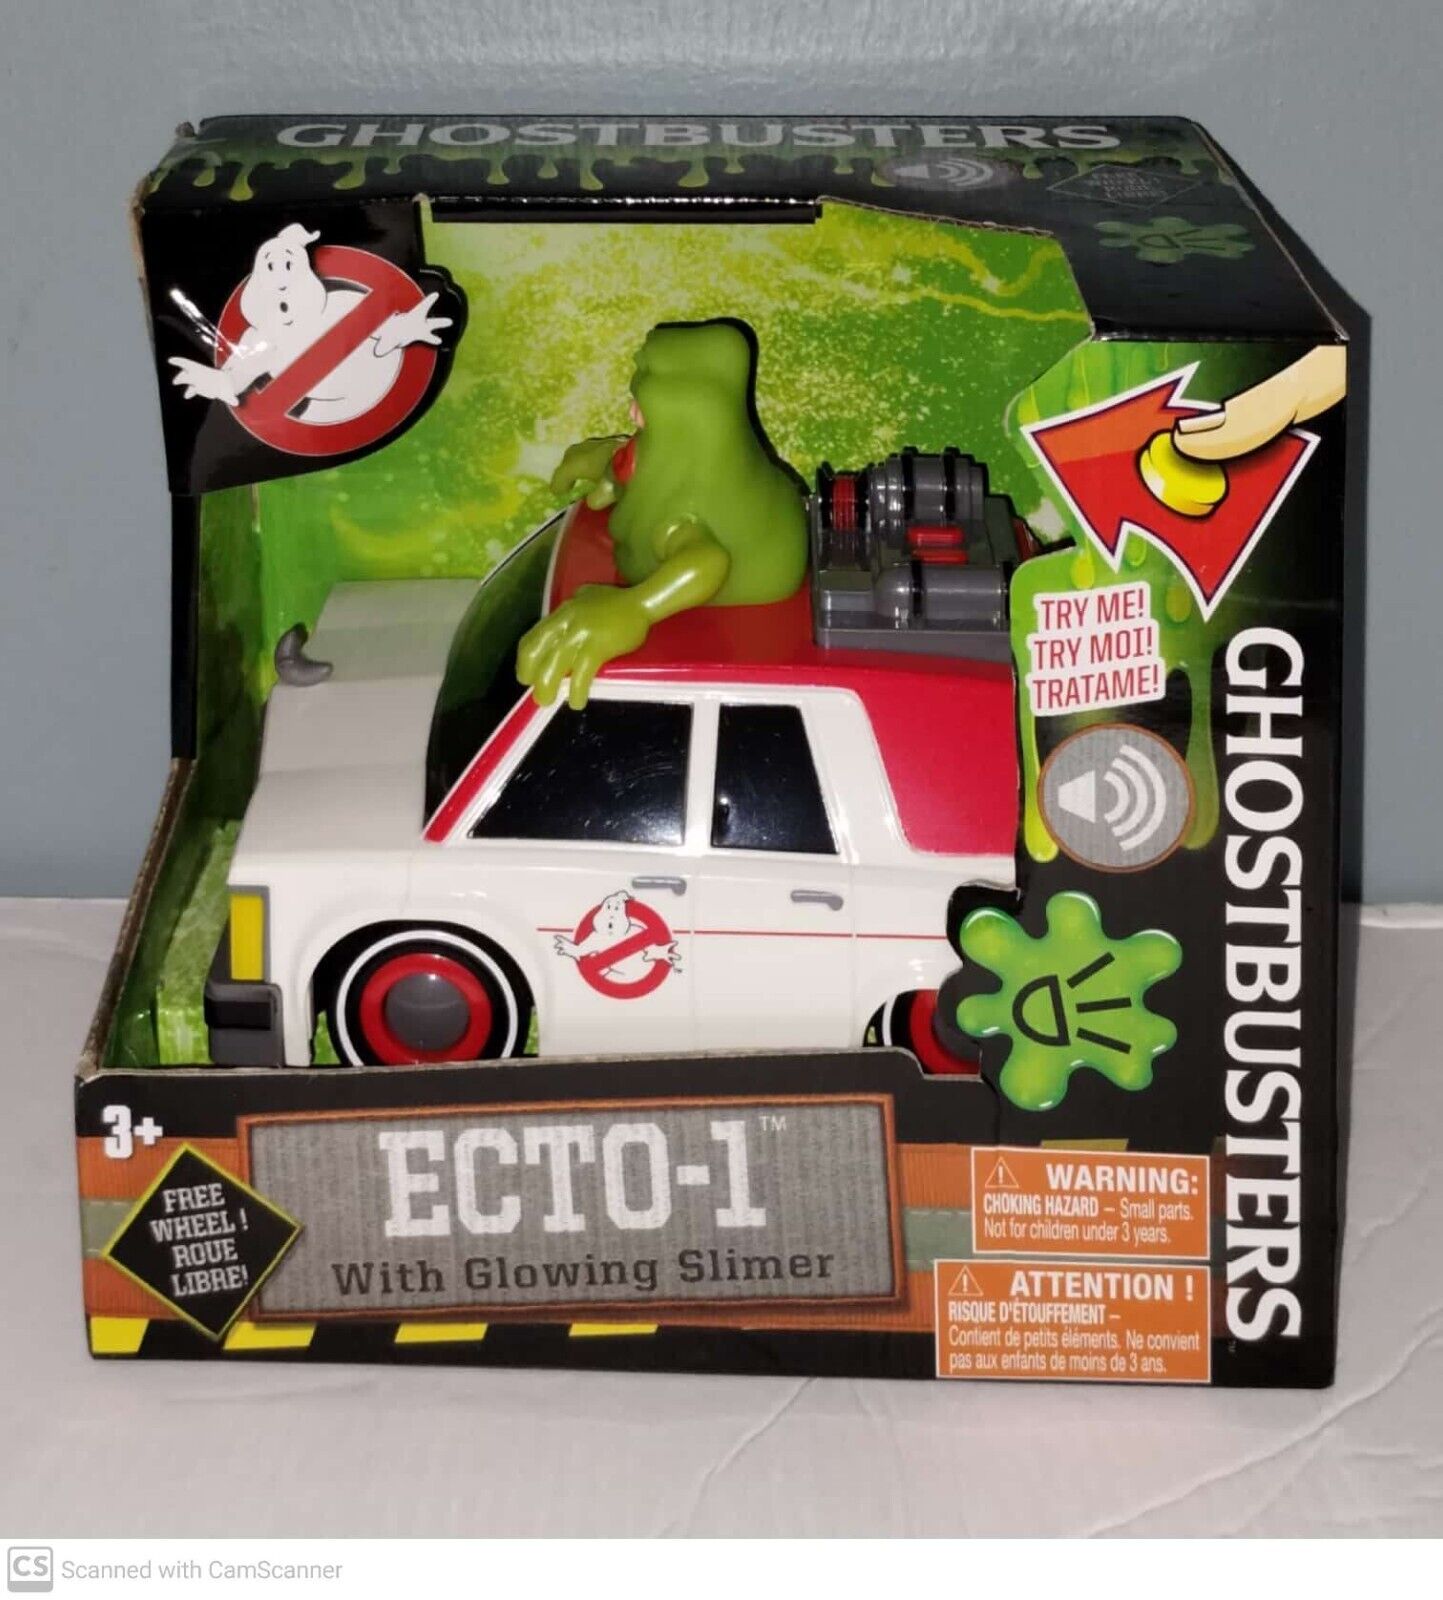 GHOSTBUSTERS ECTO-1 ECTO MINI ESTATE CAR WITH Light Up SLIMER. See Listing